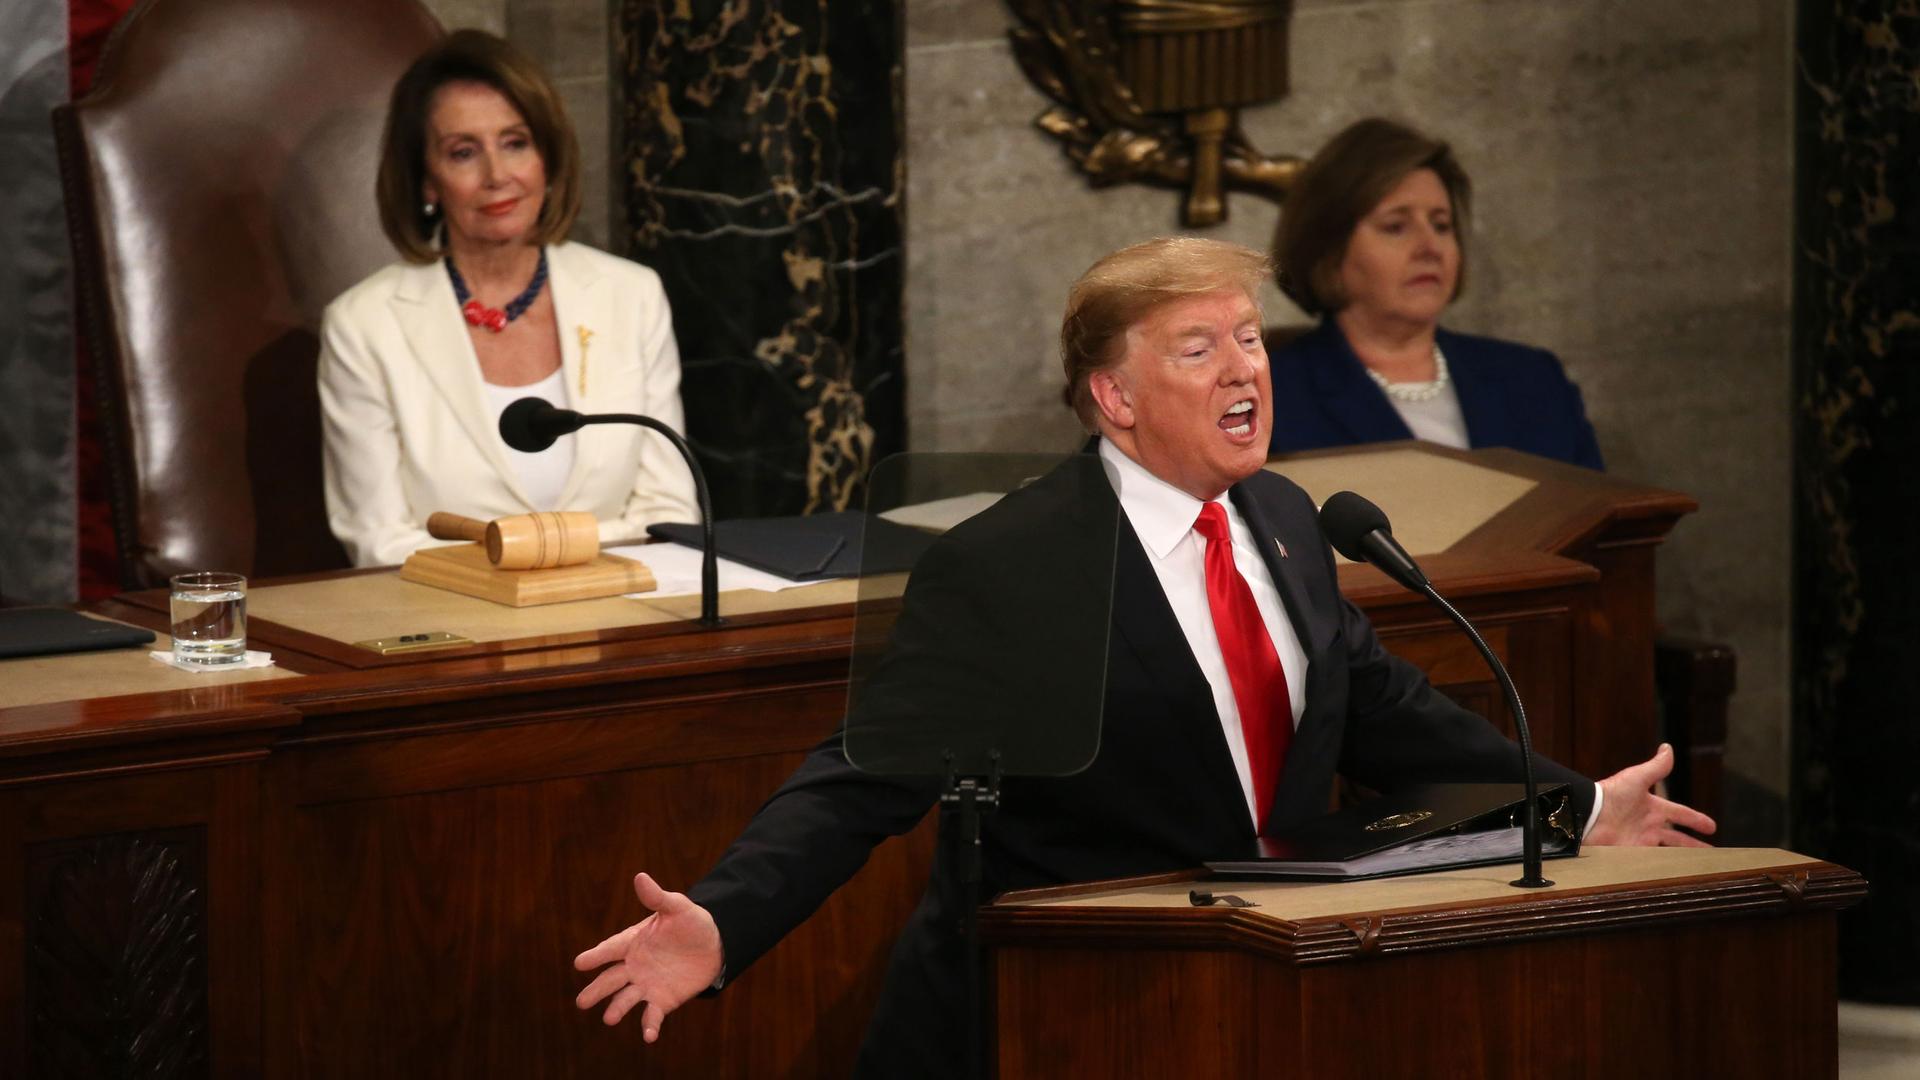 Donald Trump stands with his hands raised at the front of the House of Representatives. Behind him, Nancy Pelosi looks on. 